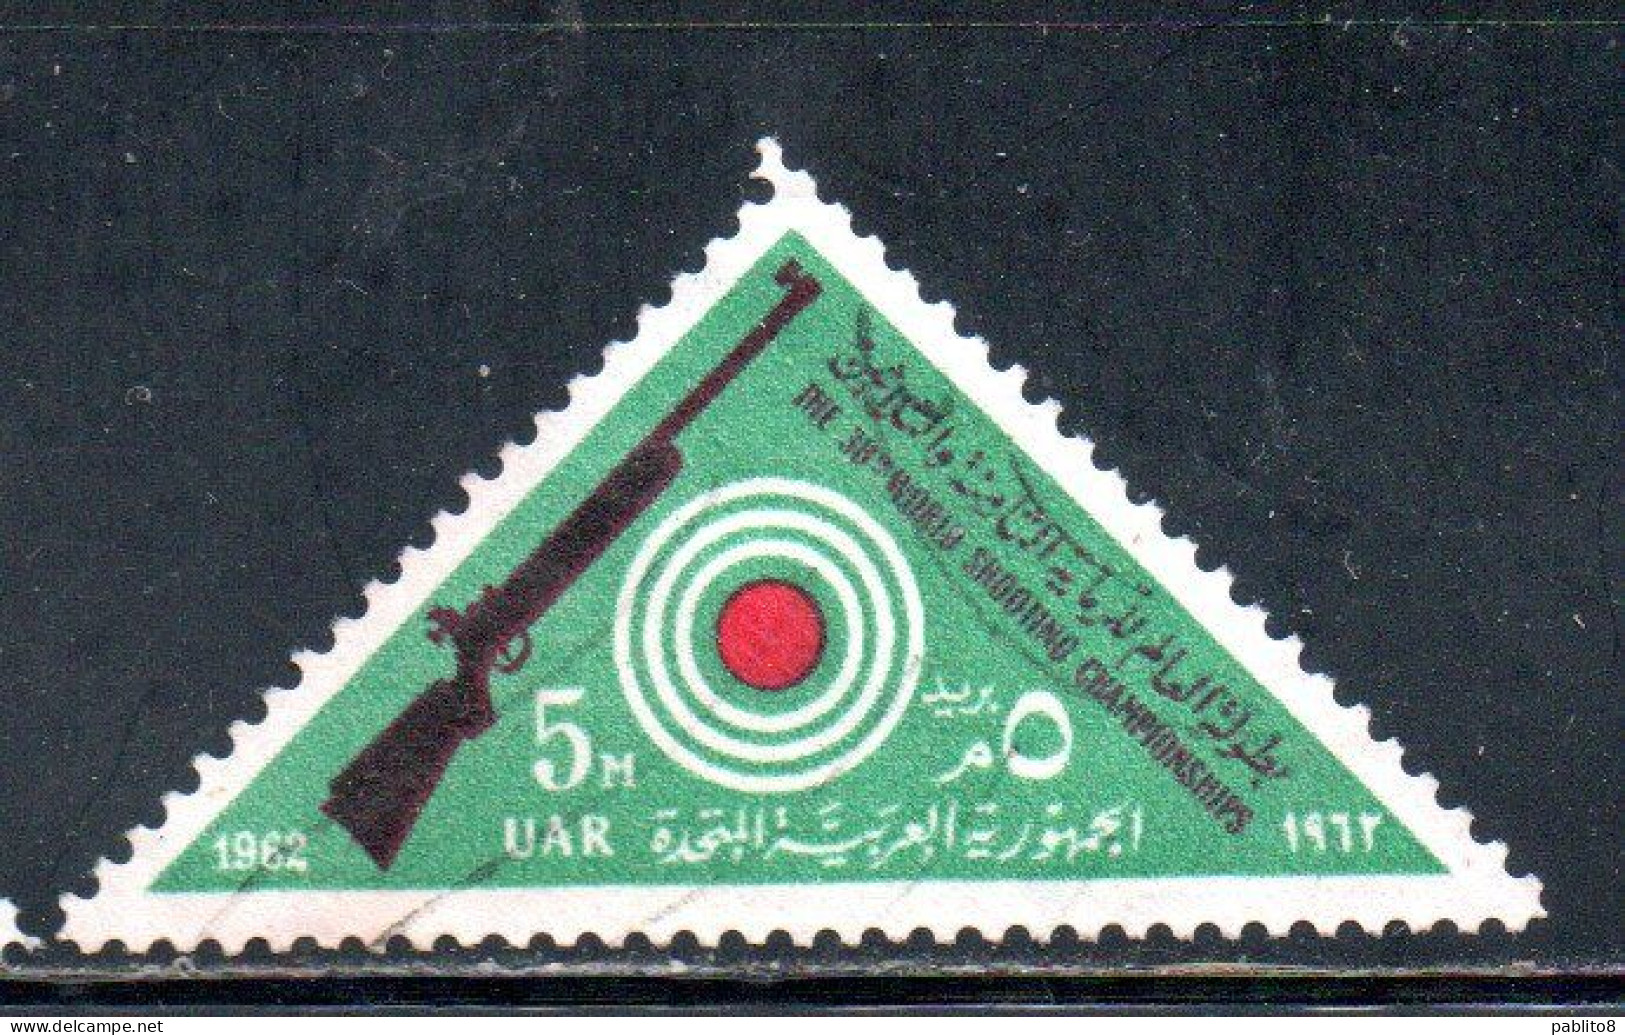 UAR EGYPT EGITTO 1962 WORLD SHOOTING CHAMPIONSHIPS AND AFRICAN TABLE TENNIS TOURNAMENTE RIFLE AND TARGET 5m USED USATO - Gebraucht